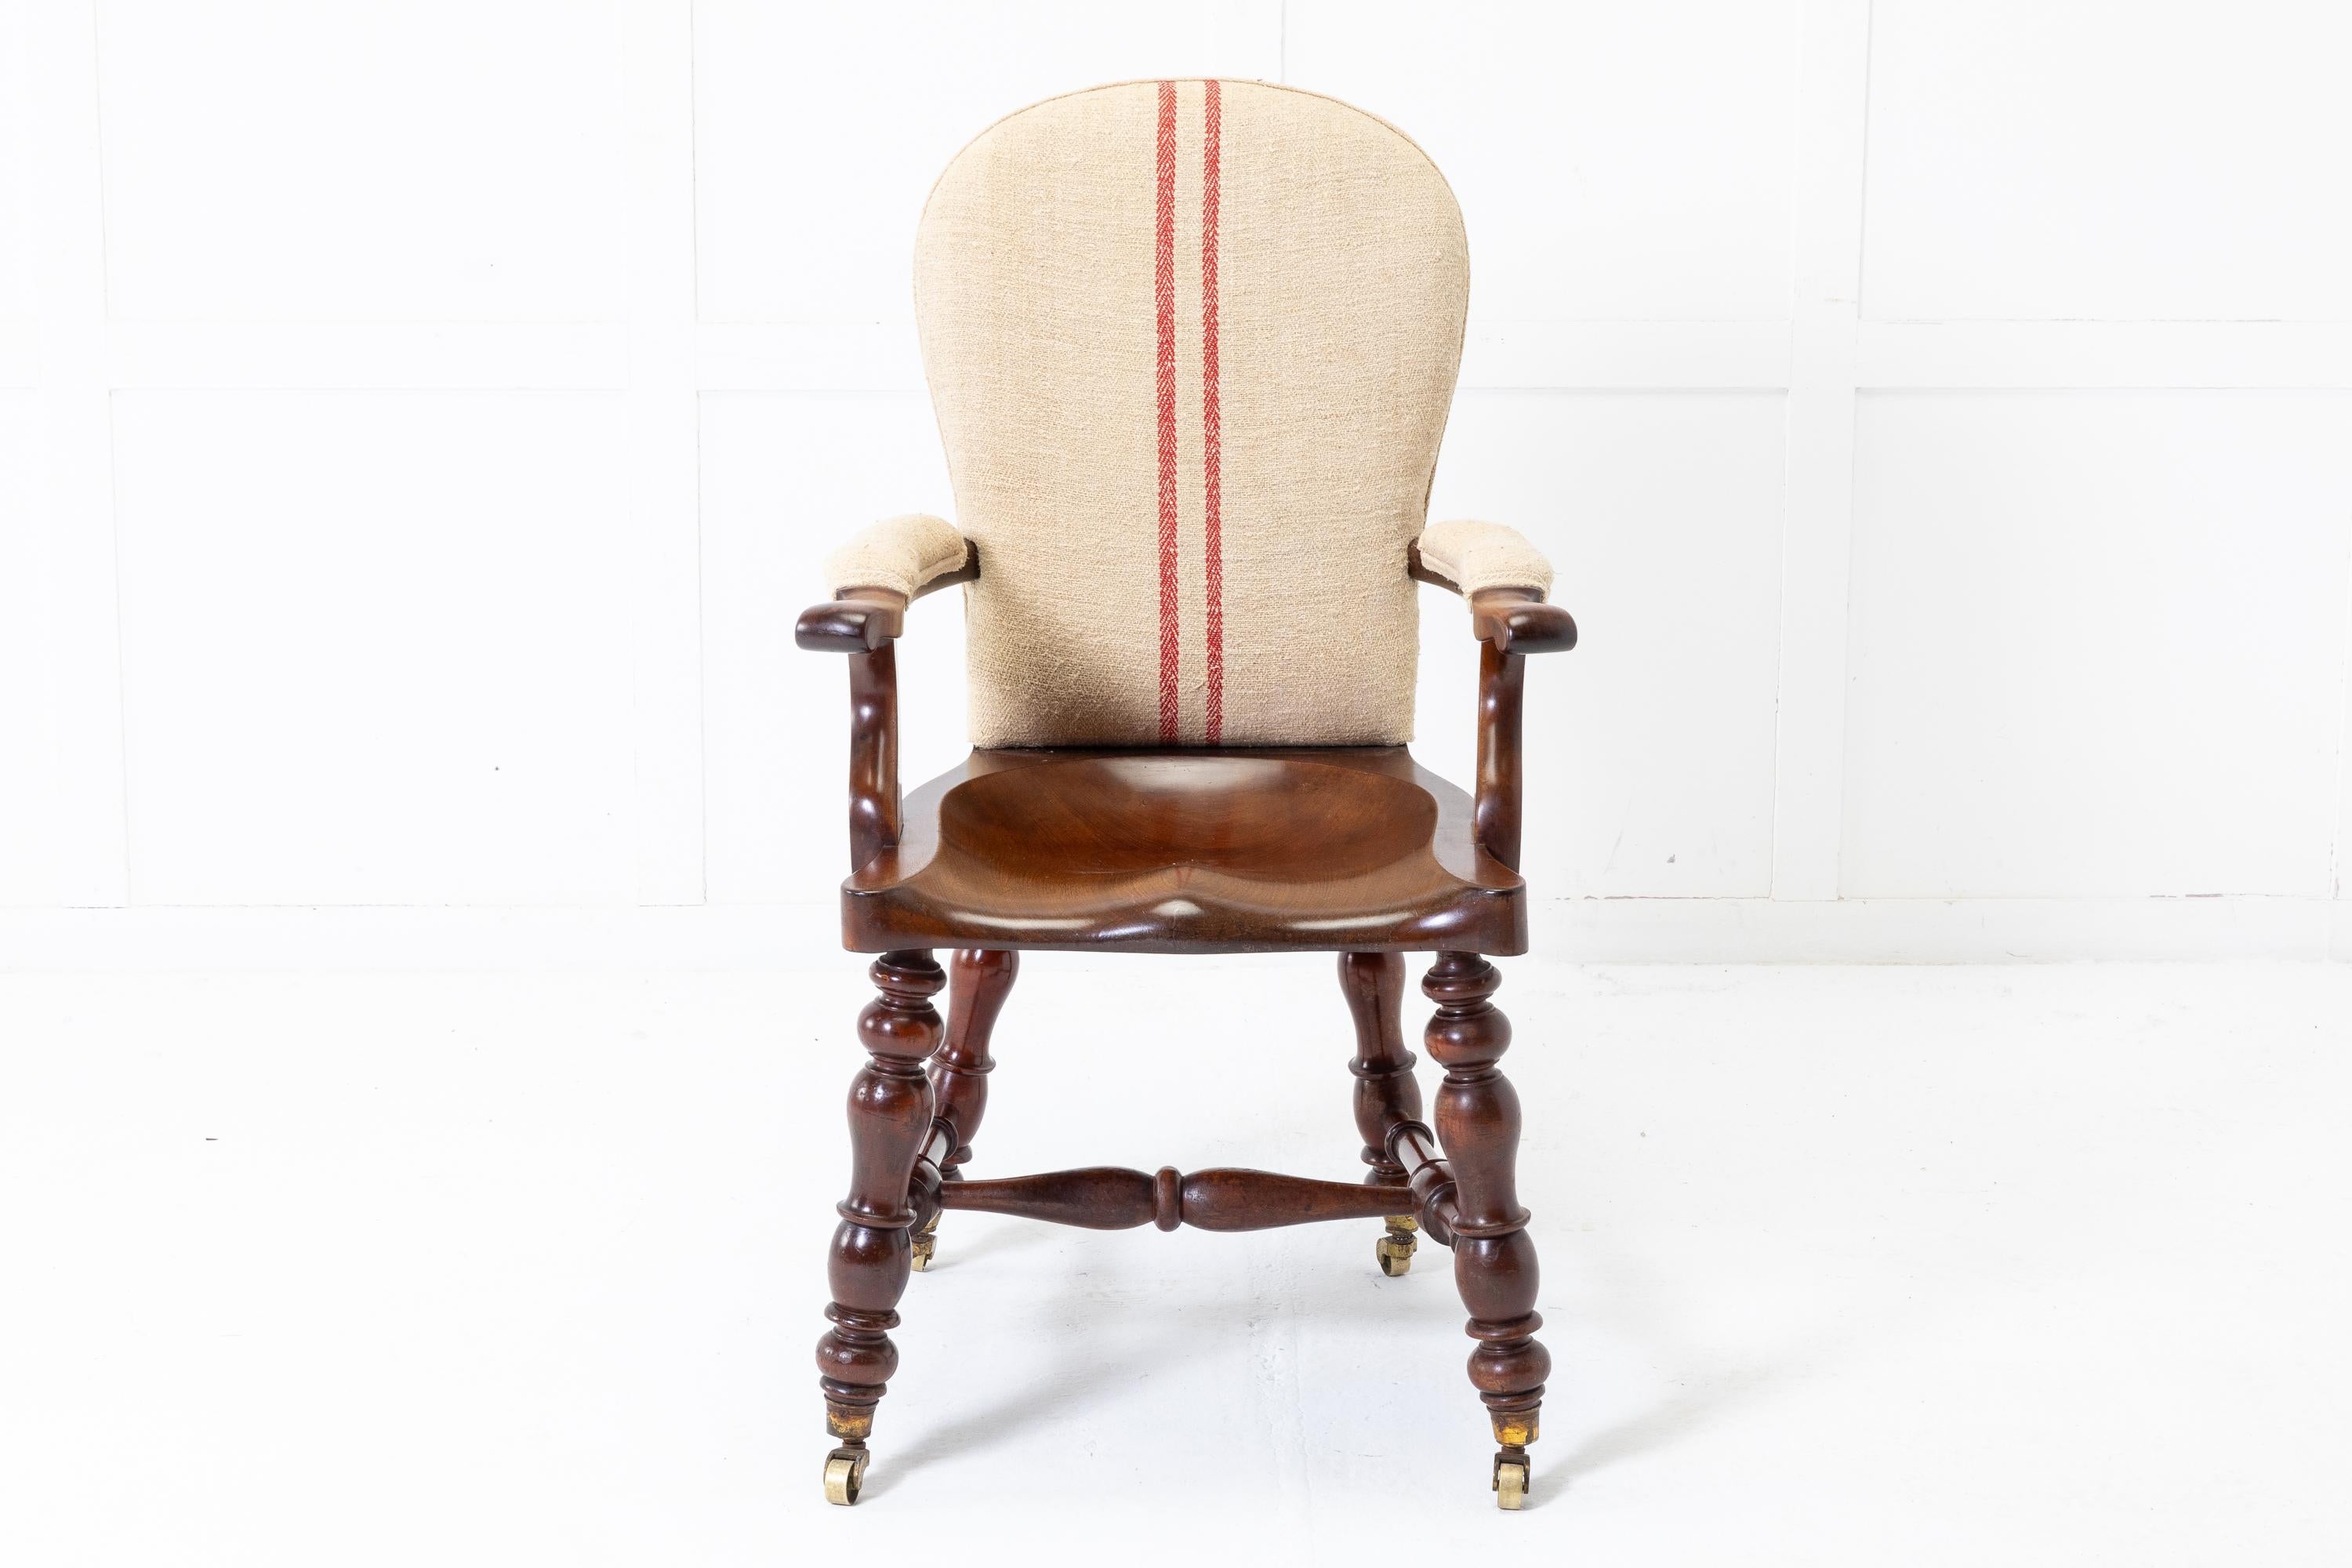 Substantial quality, heavy 19th Century English mahogany armchair with open arms and dished saddle seat. Having nicely turned legs and turned cross stretcher. Terminating in brass castors. Upholstered in old hemp fabric.

A very good chair!
